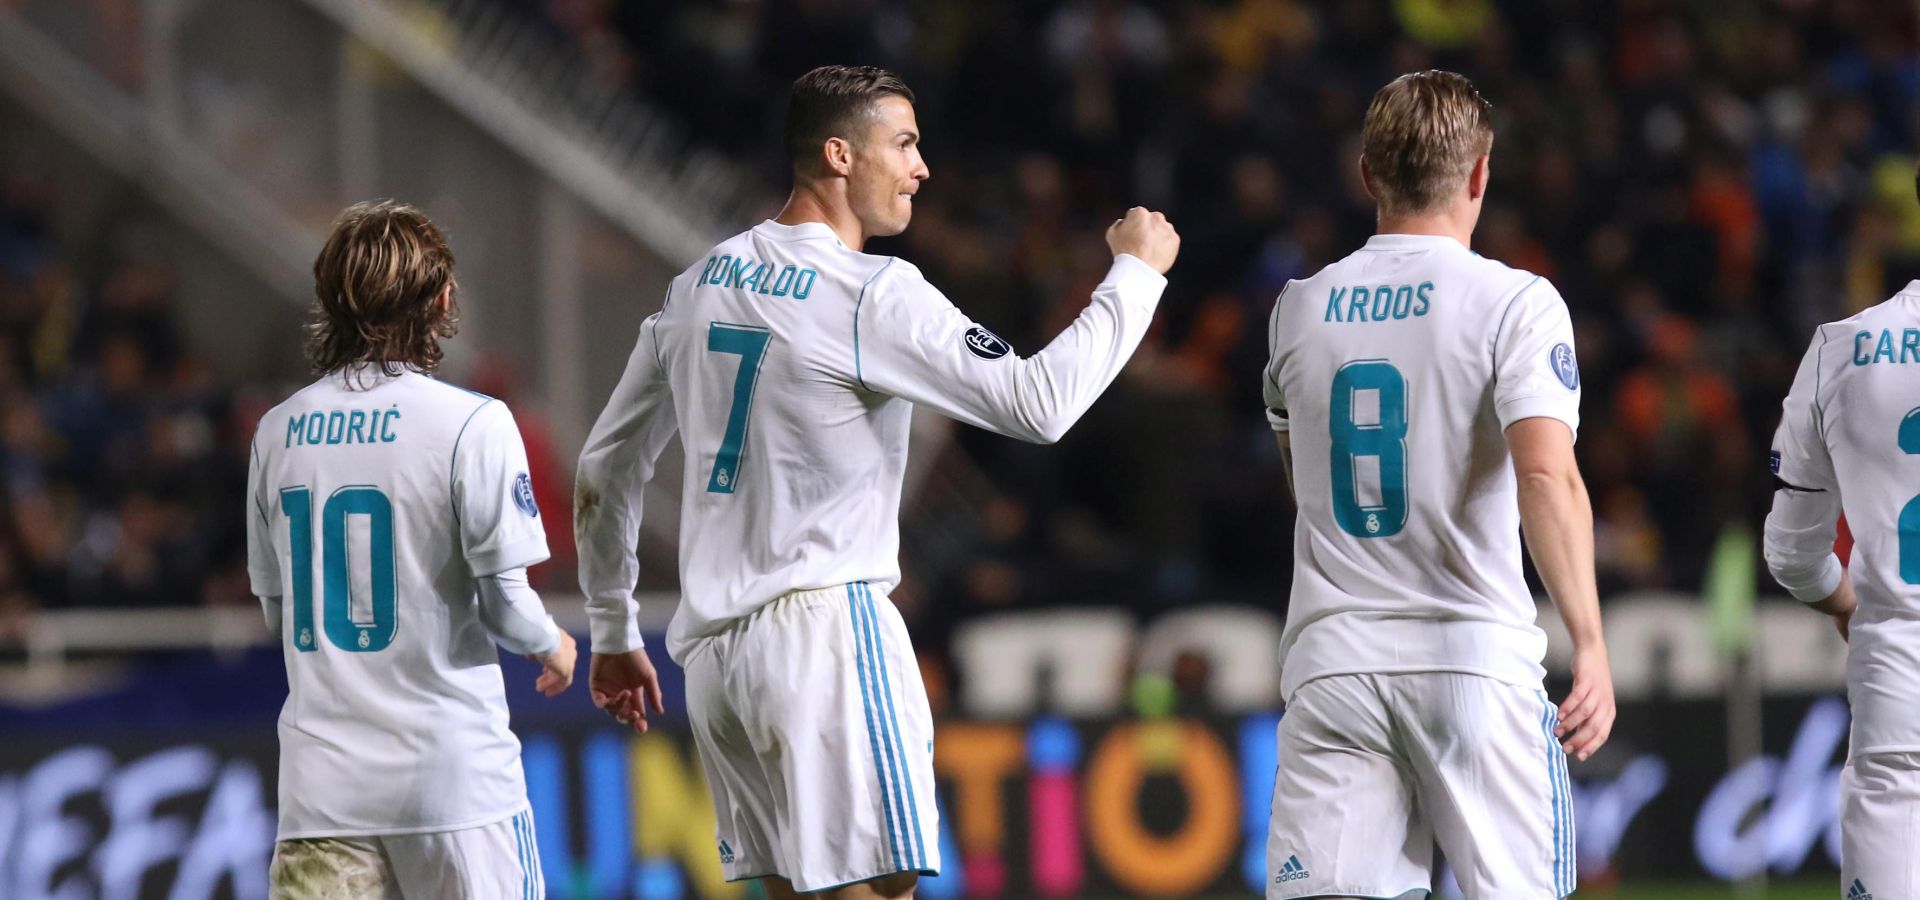 epa06342995 Real Madrid's player Cristiano Ronaldo (C), Luka Modric (L) and Toni Kroos celebrate a goal during the UEFA Champions League Group H match between Apoel FC and Real Madrid at the GSP stadium in Nicosia, Cyprus, 21 November 2017.  EPA/KATIA CHRISTODOULOU